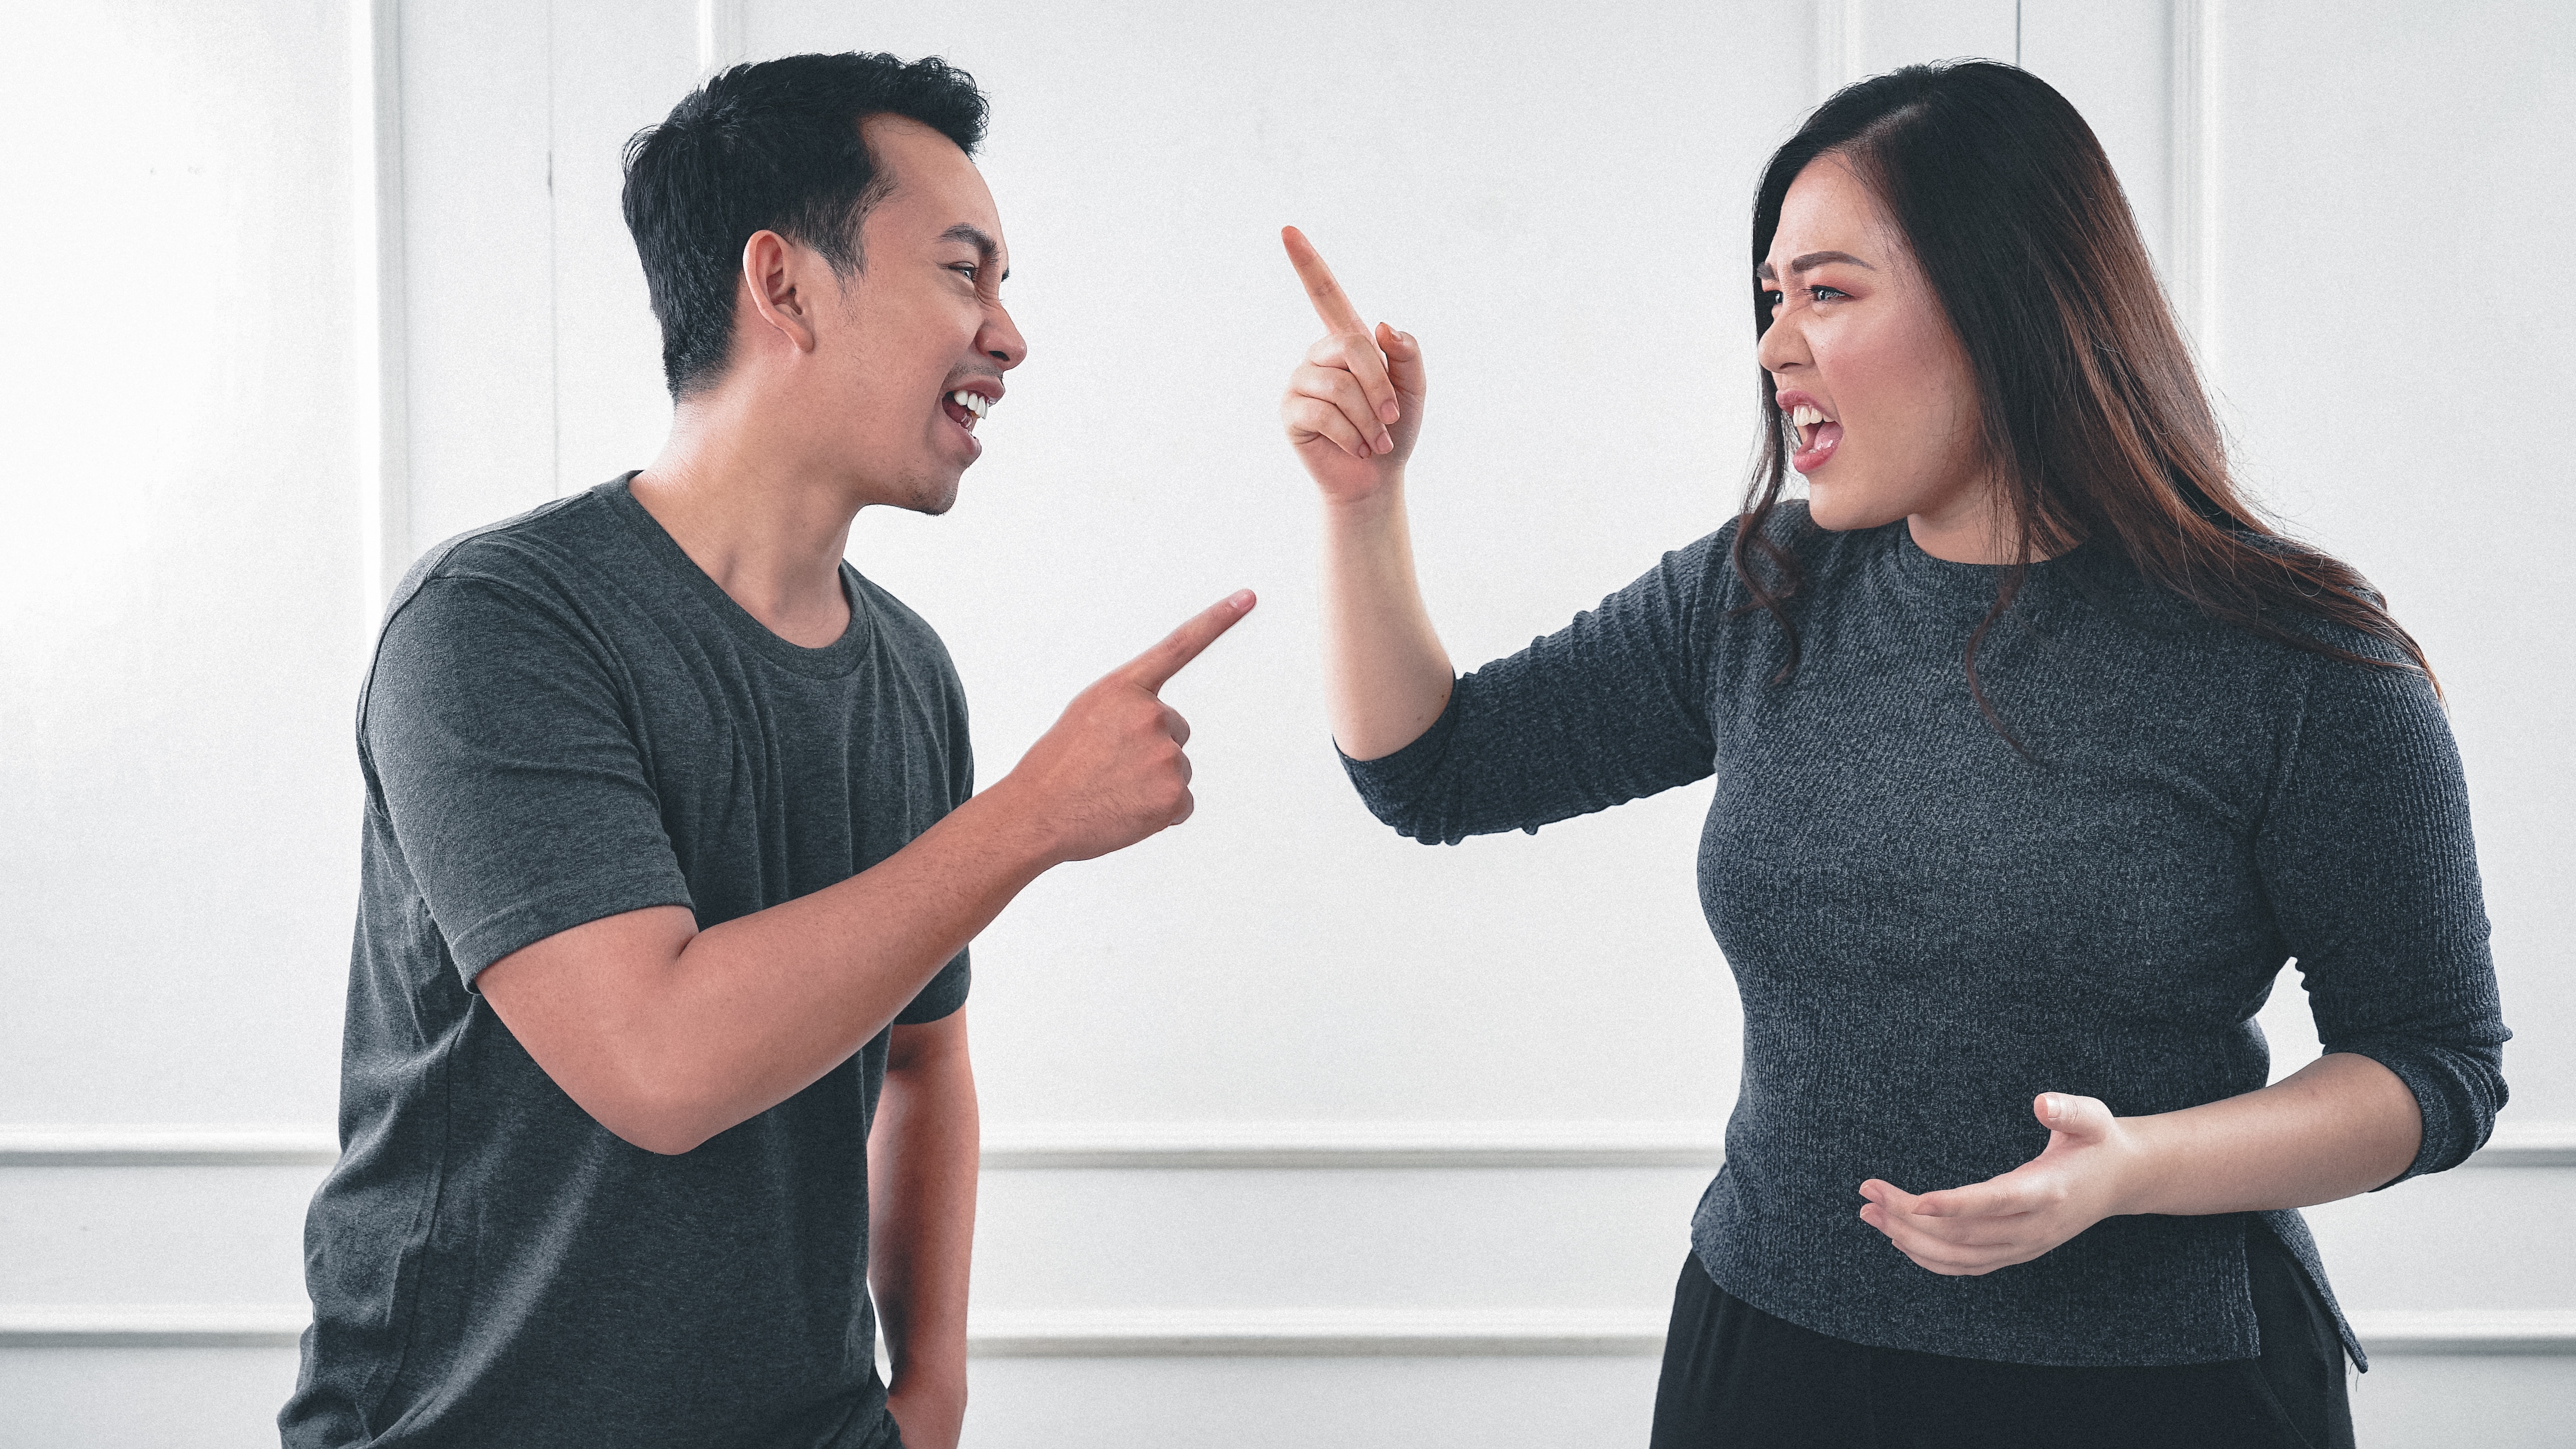 A photo of a man and a woman pointing at each other | Source: Unsplash